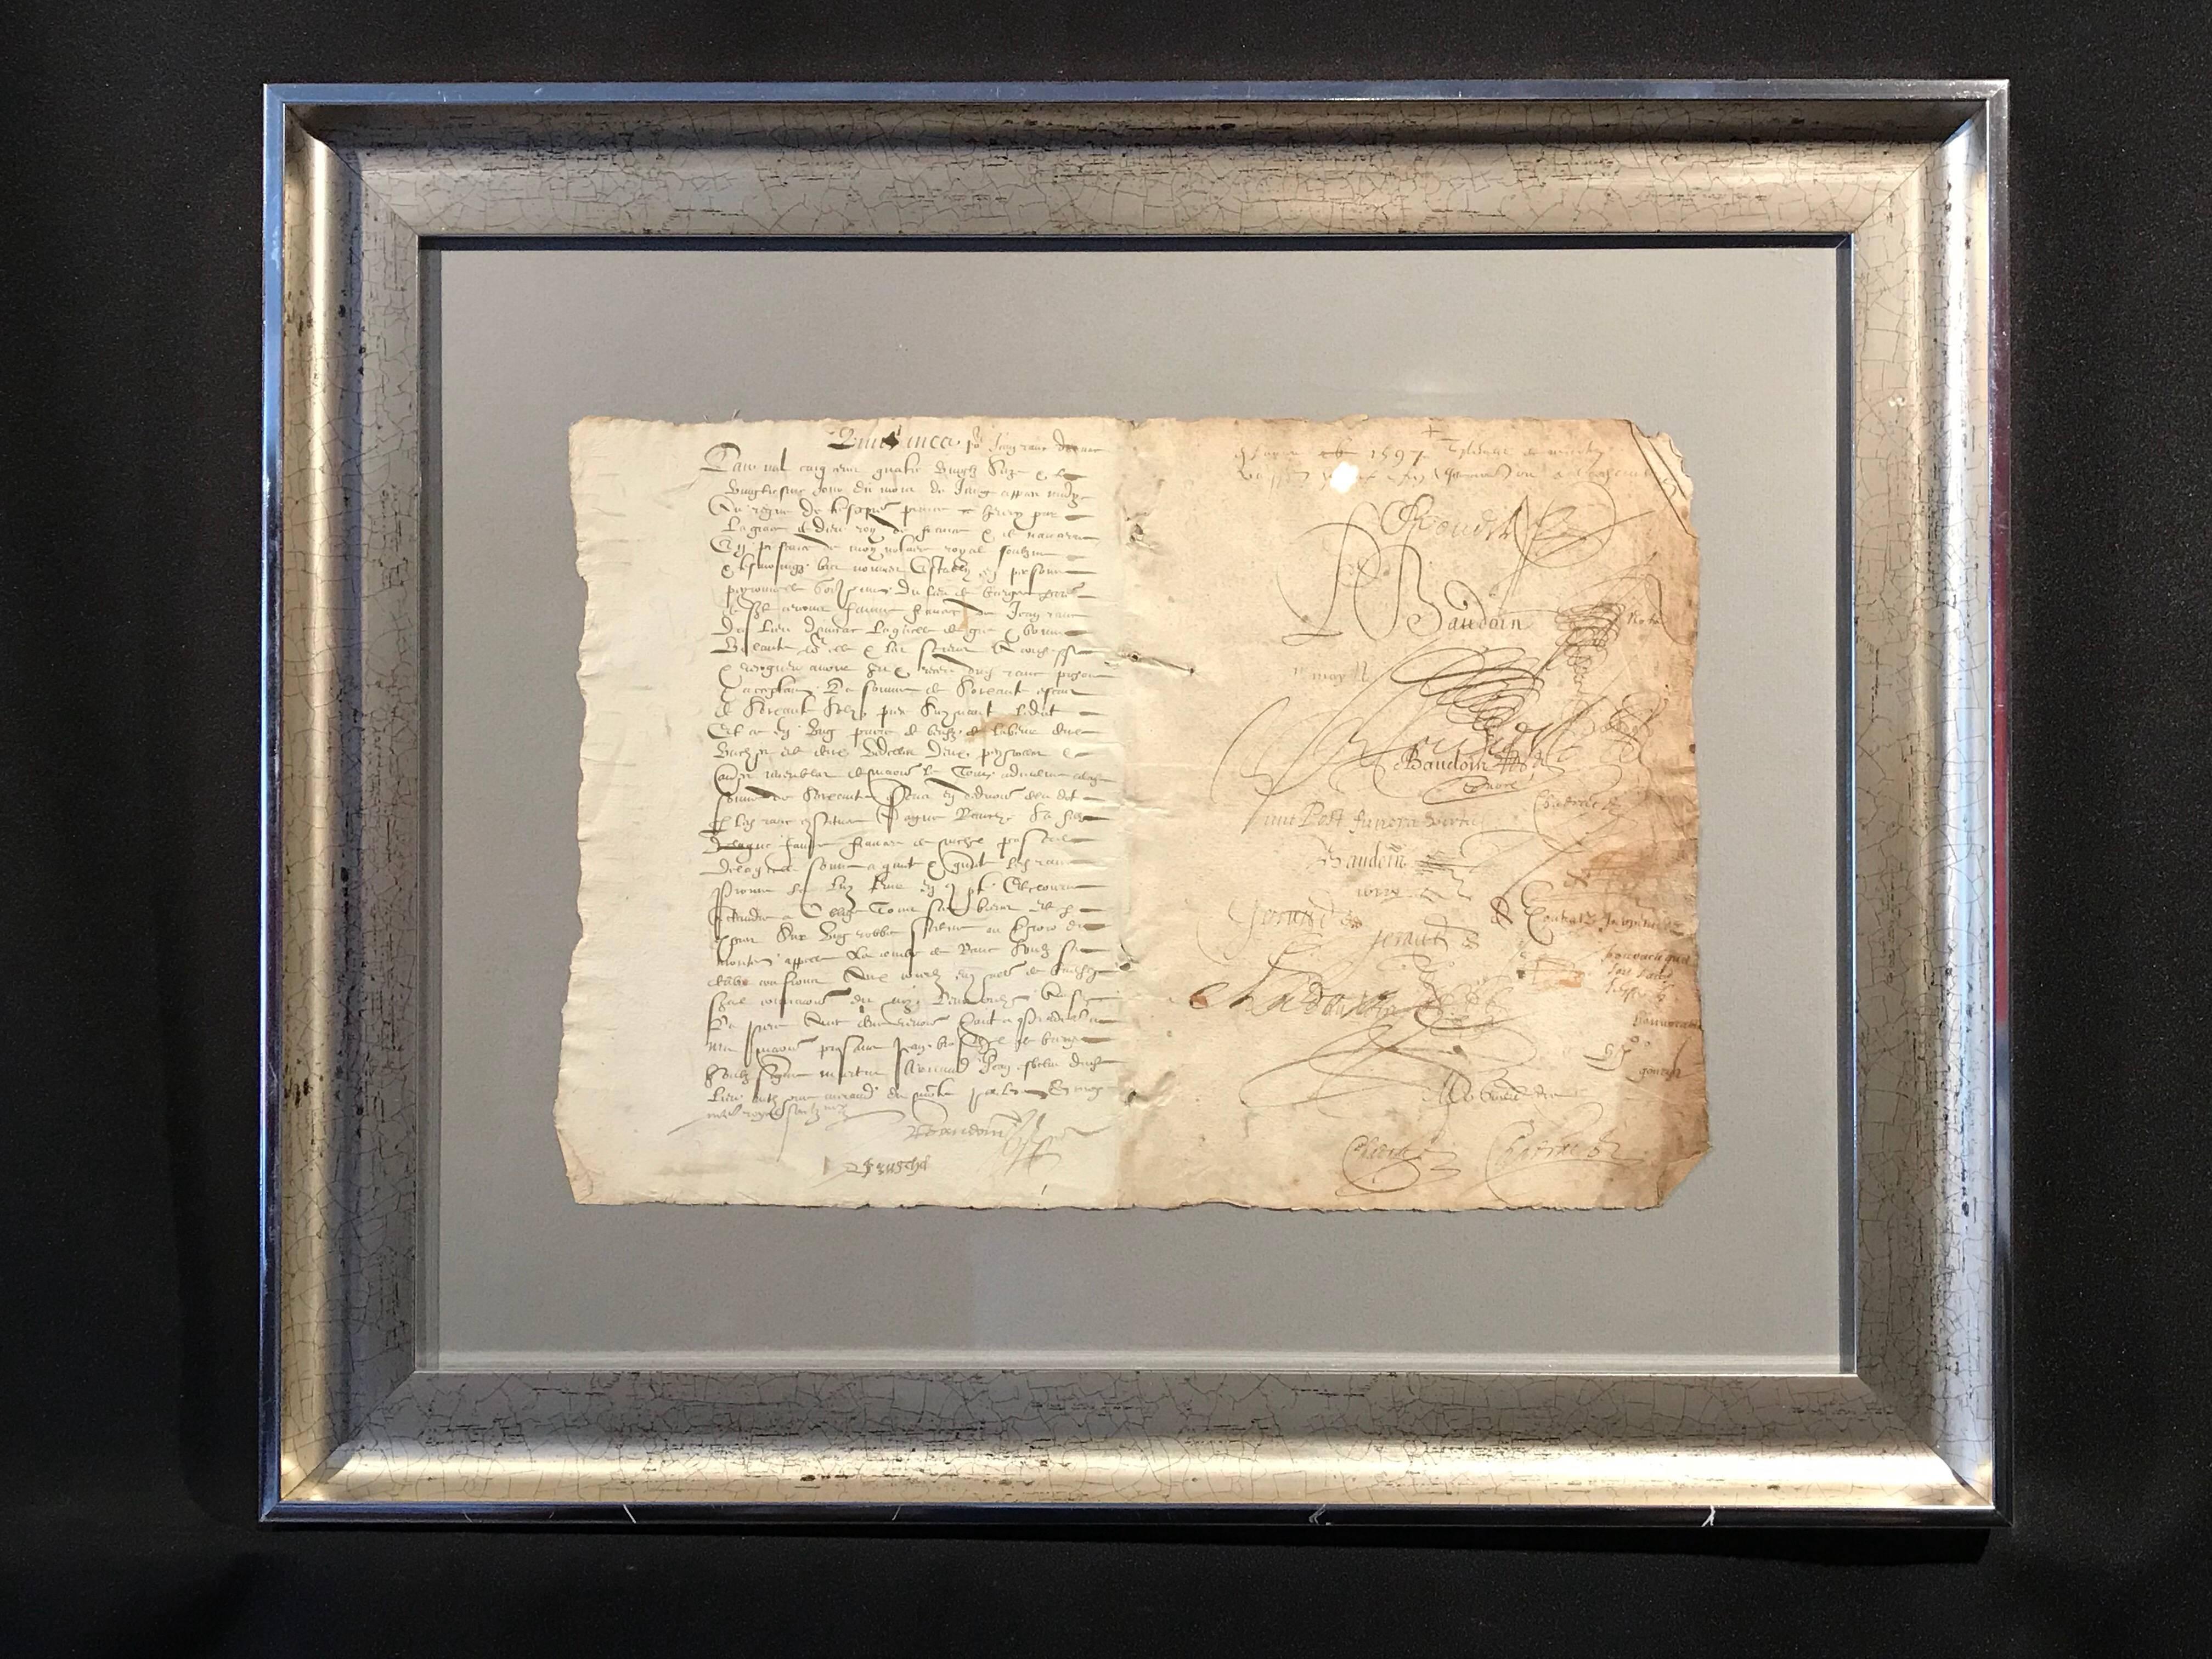 16th Century Framed French Hand Written Document - Art by Unknown